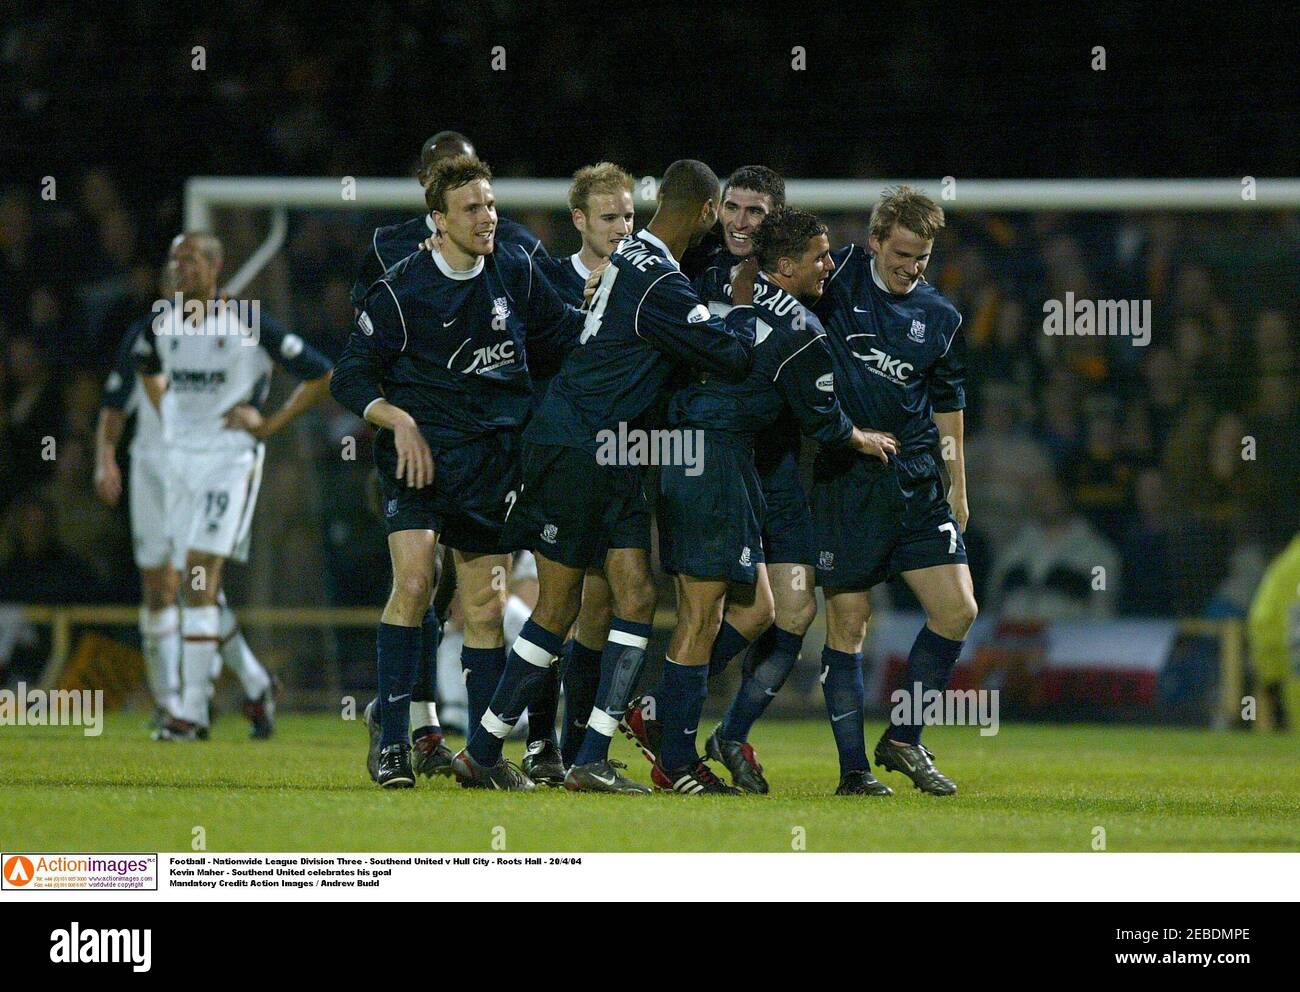 Fußball - Nationwide League Division Three - Southend United gegen Hull City - Roots Hall - 20/4/04 Kevin Maher - Southend United feiert sein Ziel Pflichtangabe: Action Images / Andrew Budd Stockfoto